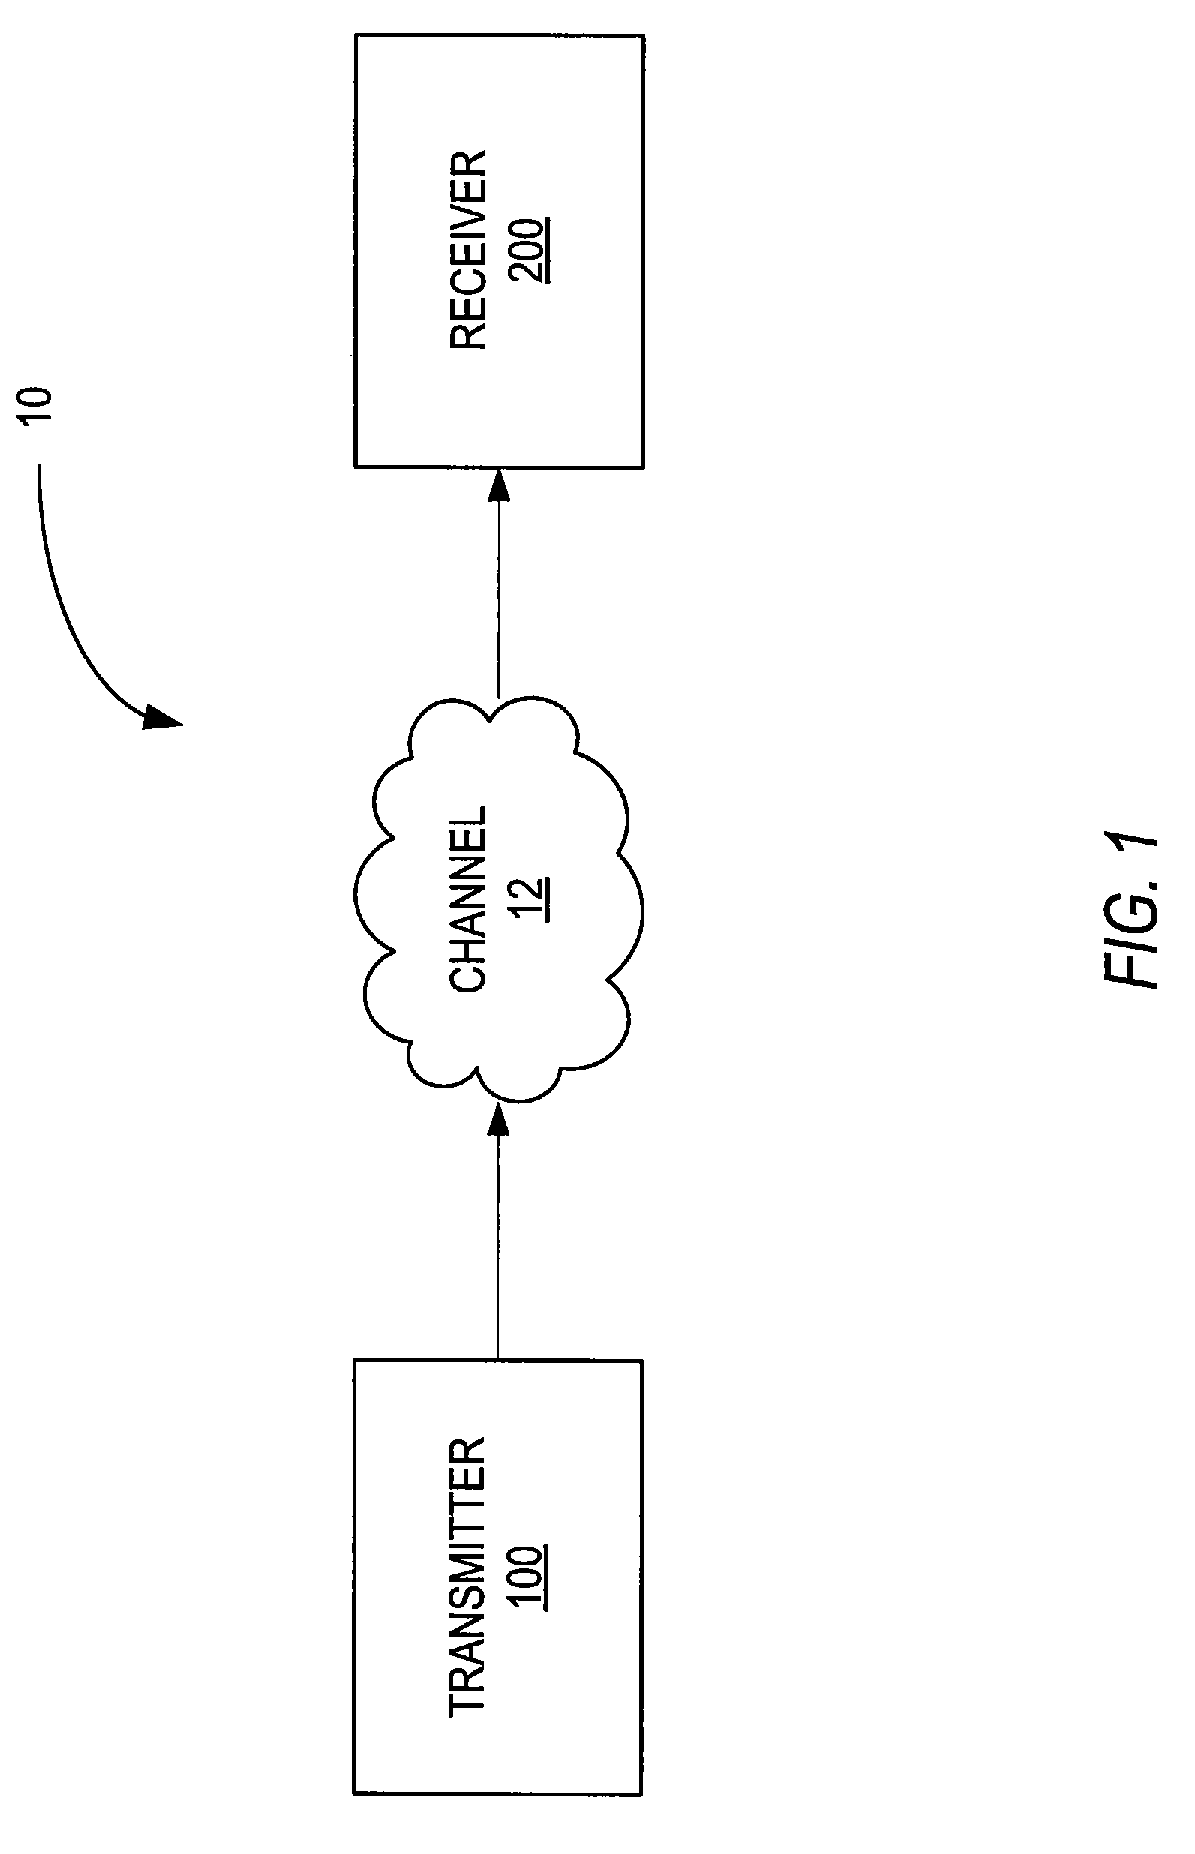 Automatic Gain Control Based on Bandwidth and Delay Spread